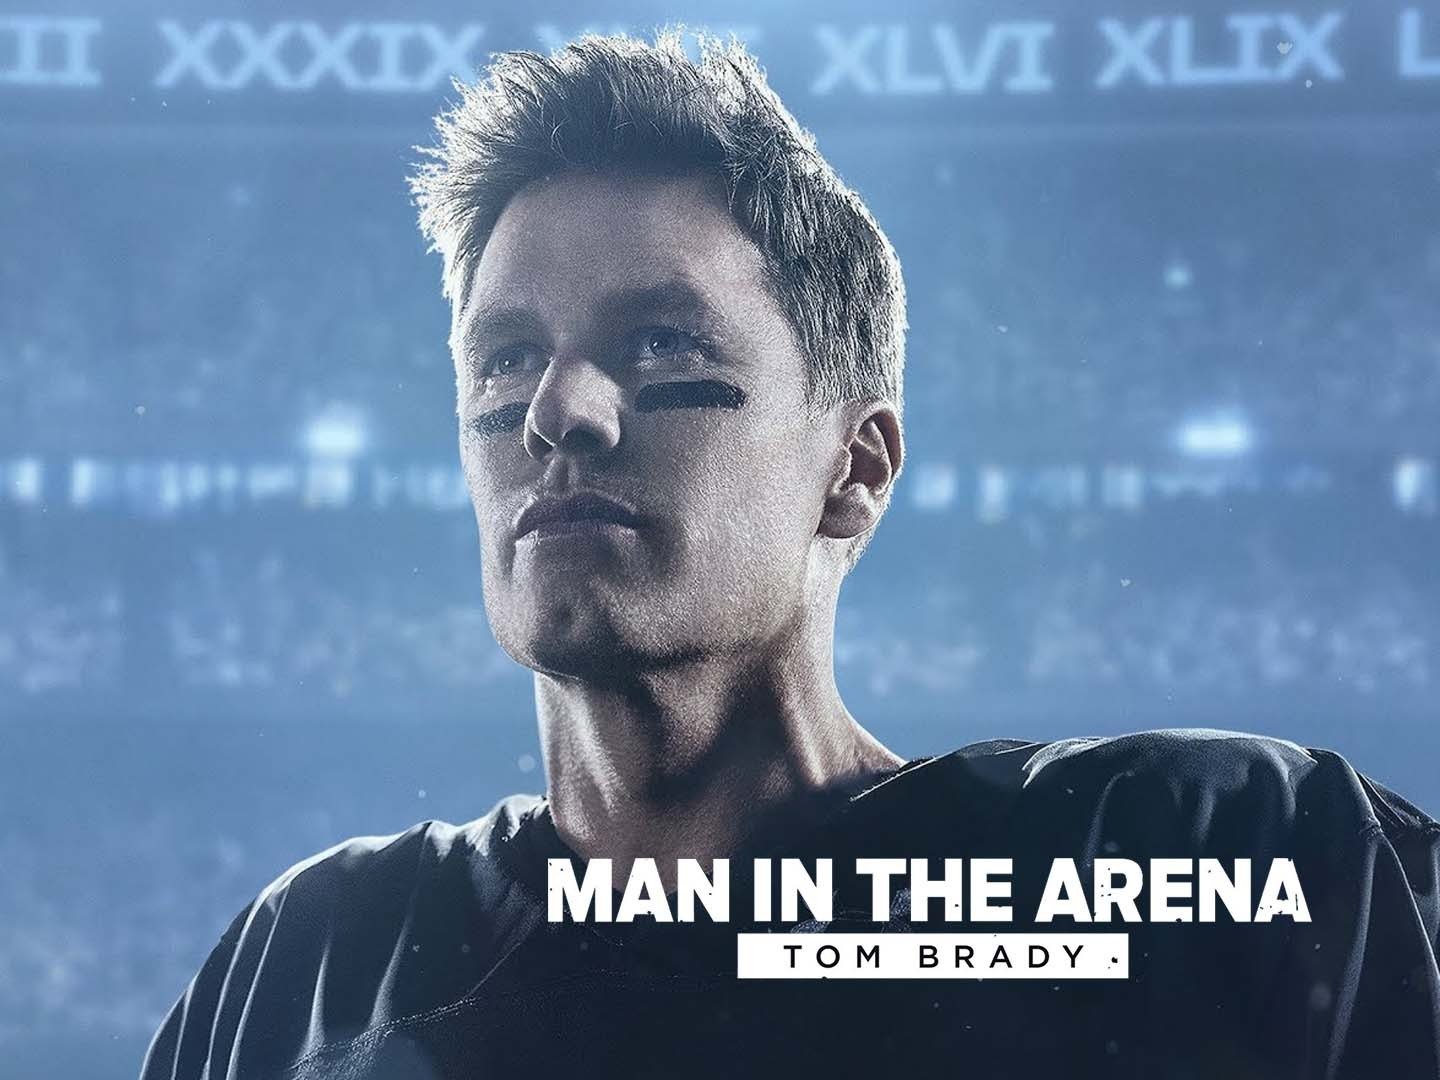 Man in the Arena: Tom Brady to Debut Exclusively on ESPN+